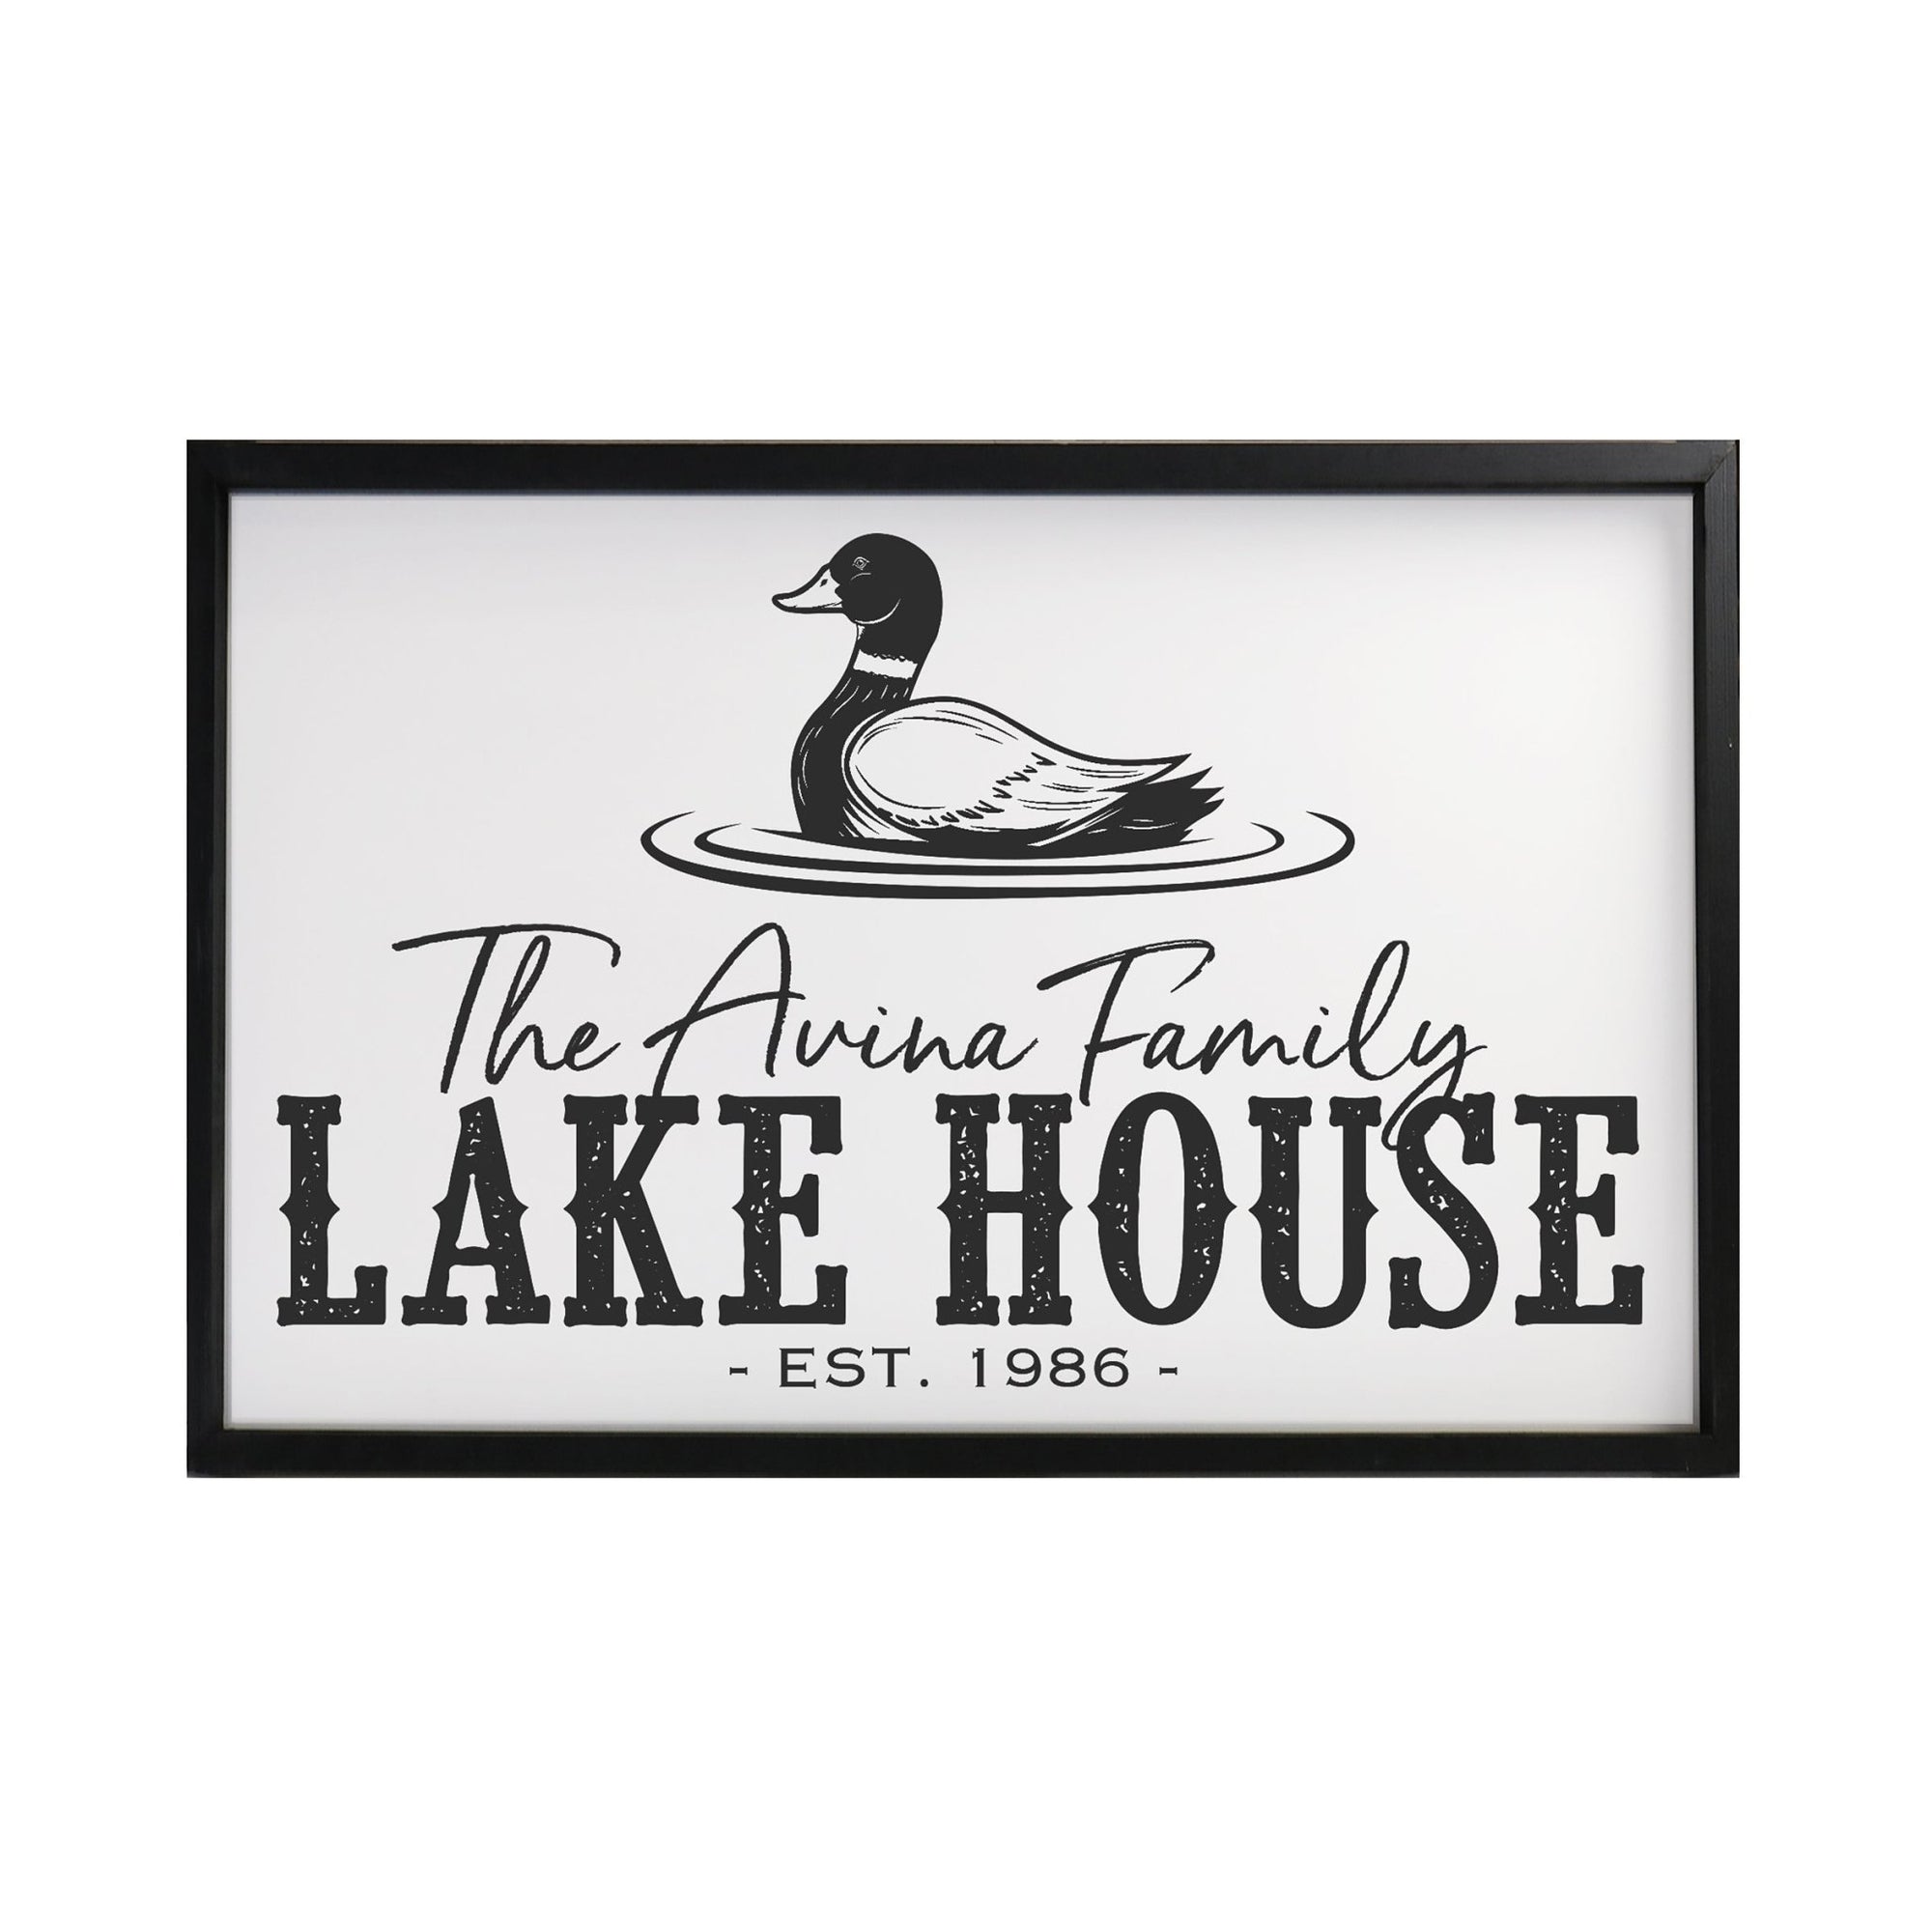 Inspirational Personalized Framed Shadow Box 25x36 - Lake House (Duck) - LifeSong Milestones